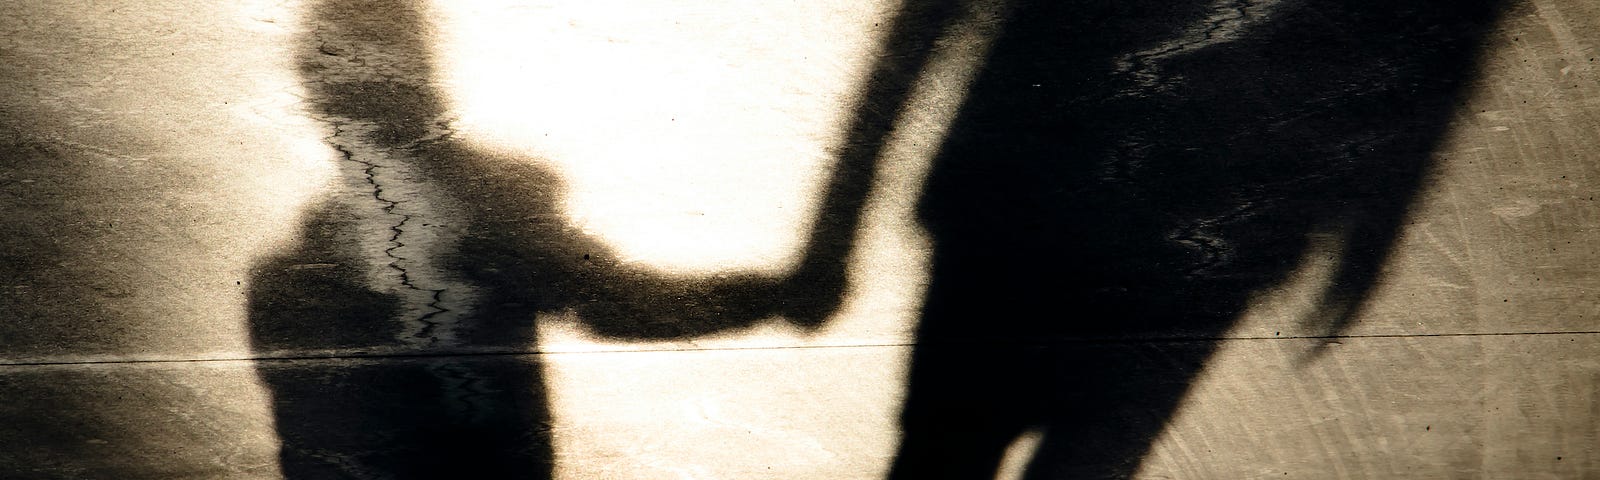 Shadows on pavement cast by a child and an adult holding hands as they walk.